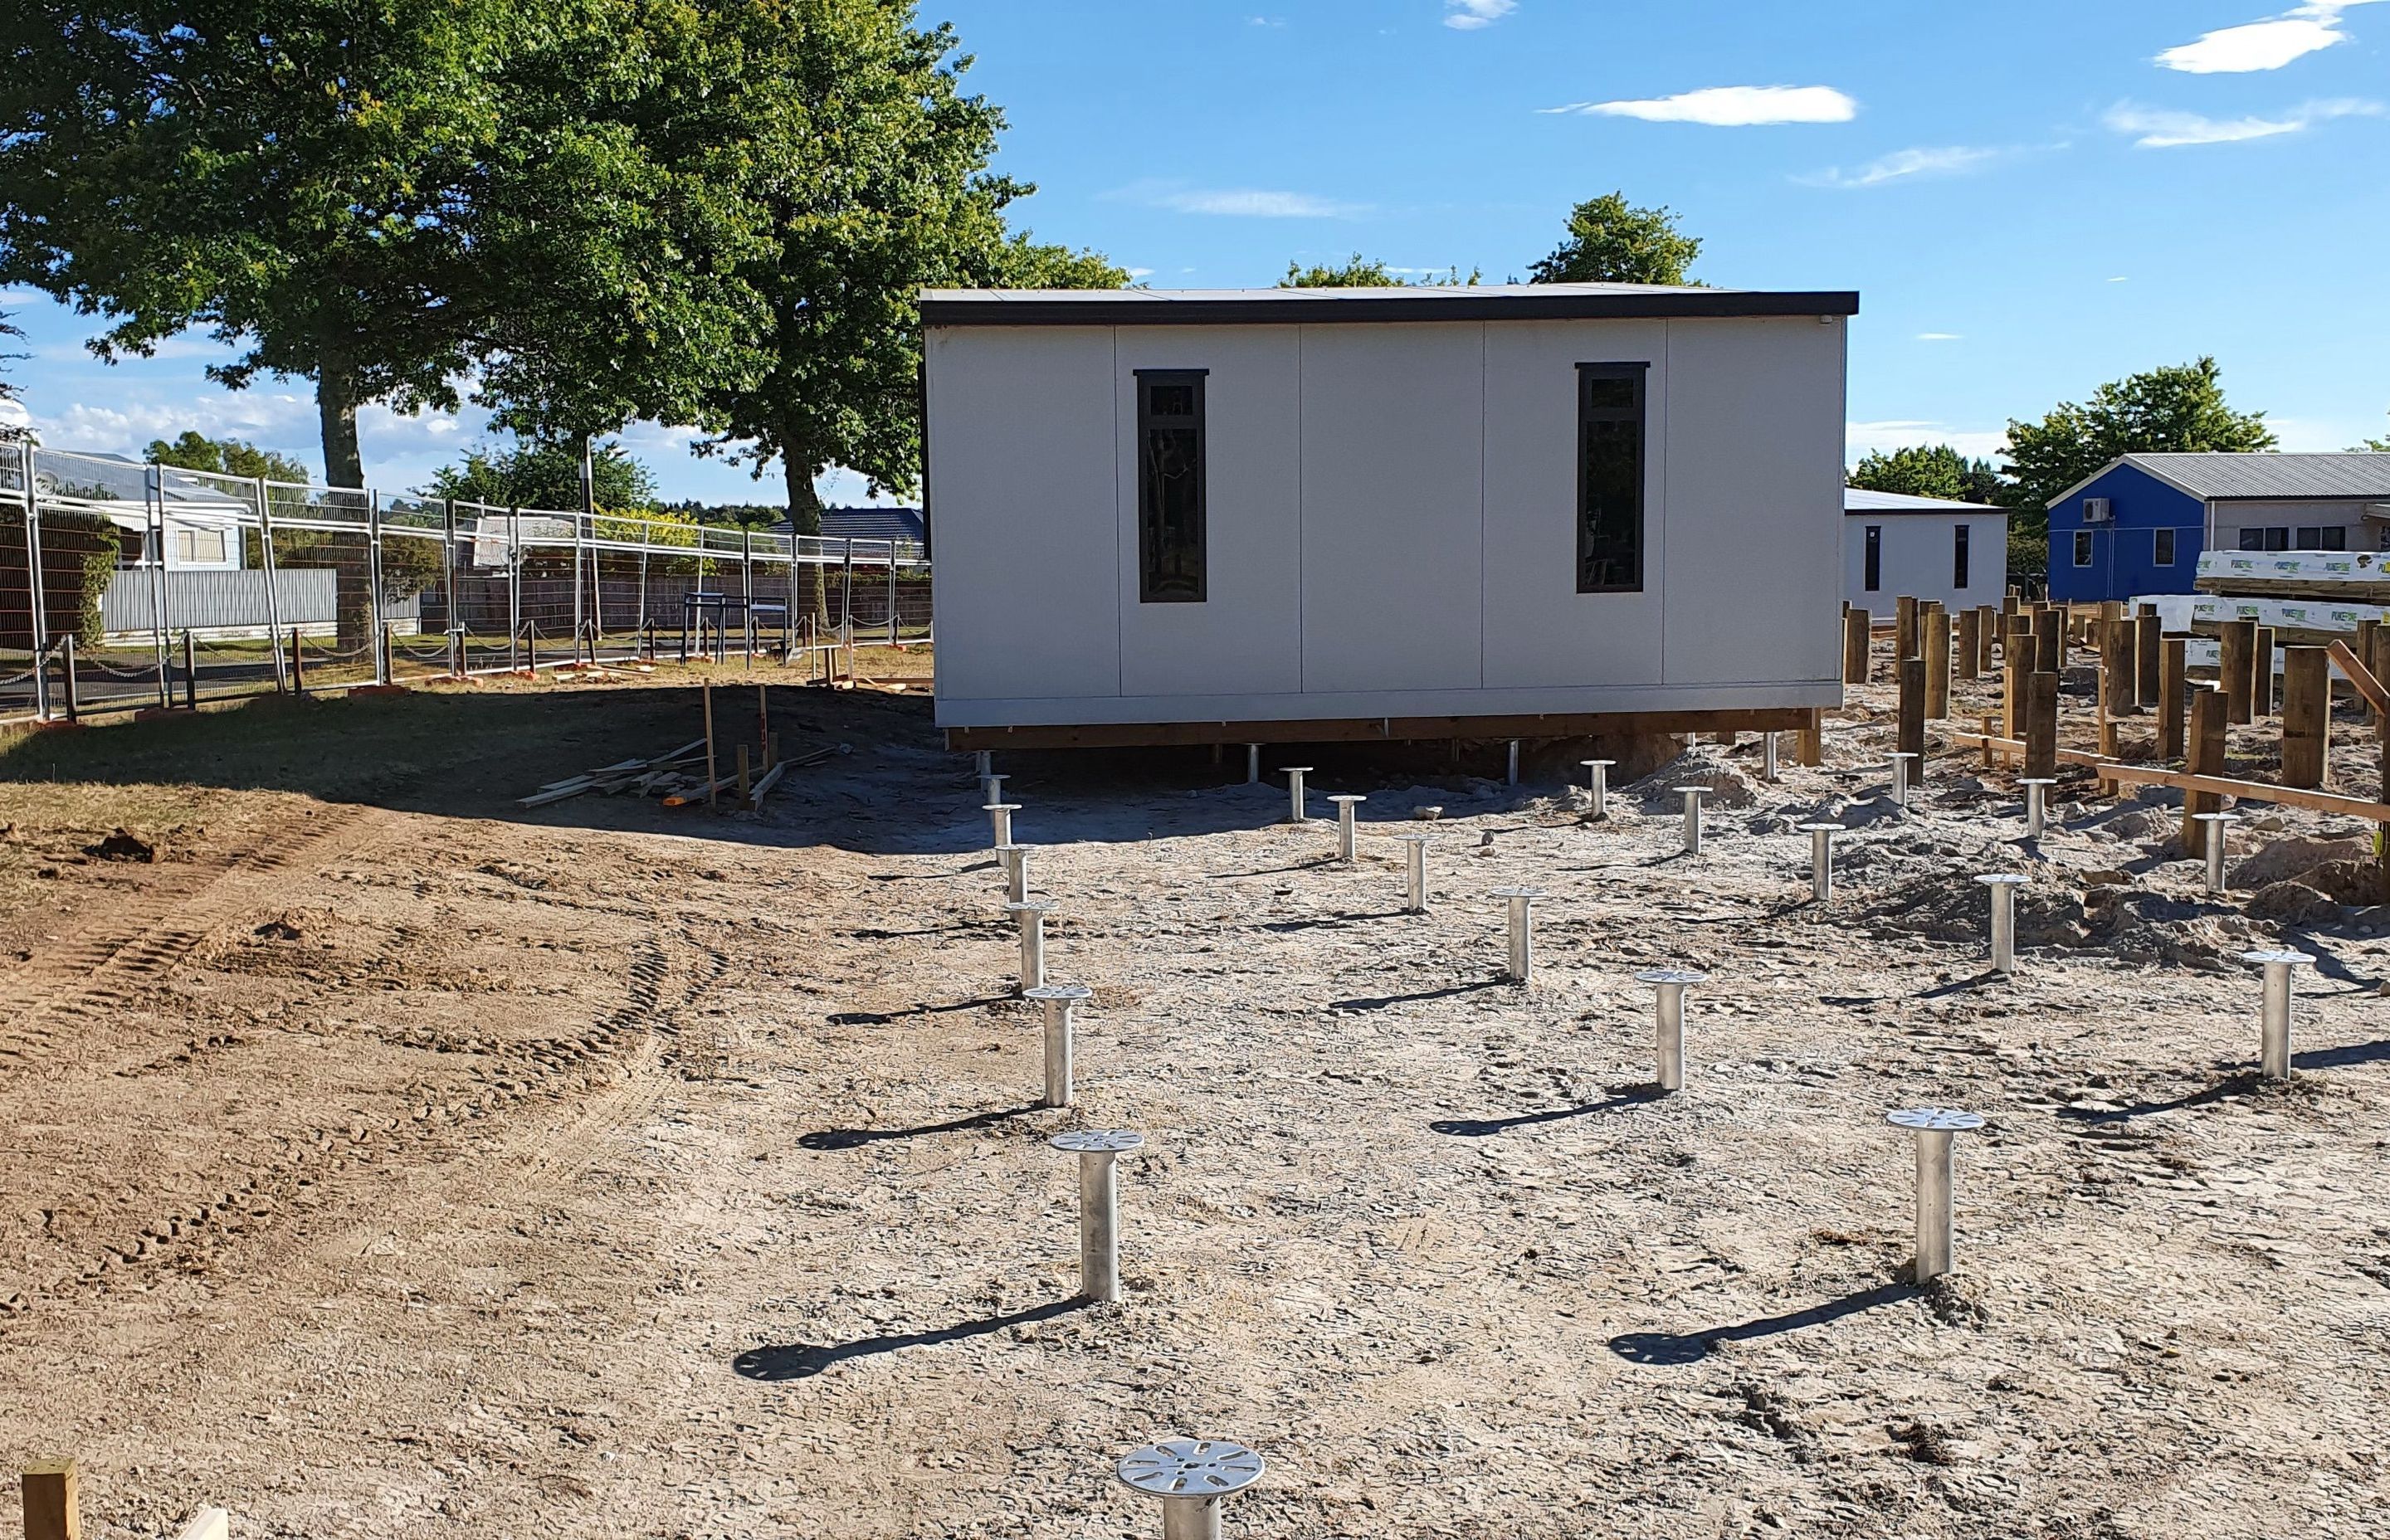 Installation of the ground screw foundation creates absolutely no mess, meaning there’s no fill to cart away from the site and, ground screw foundations are ready to take load instantly.